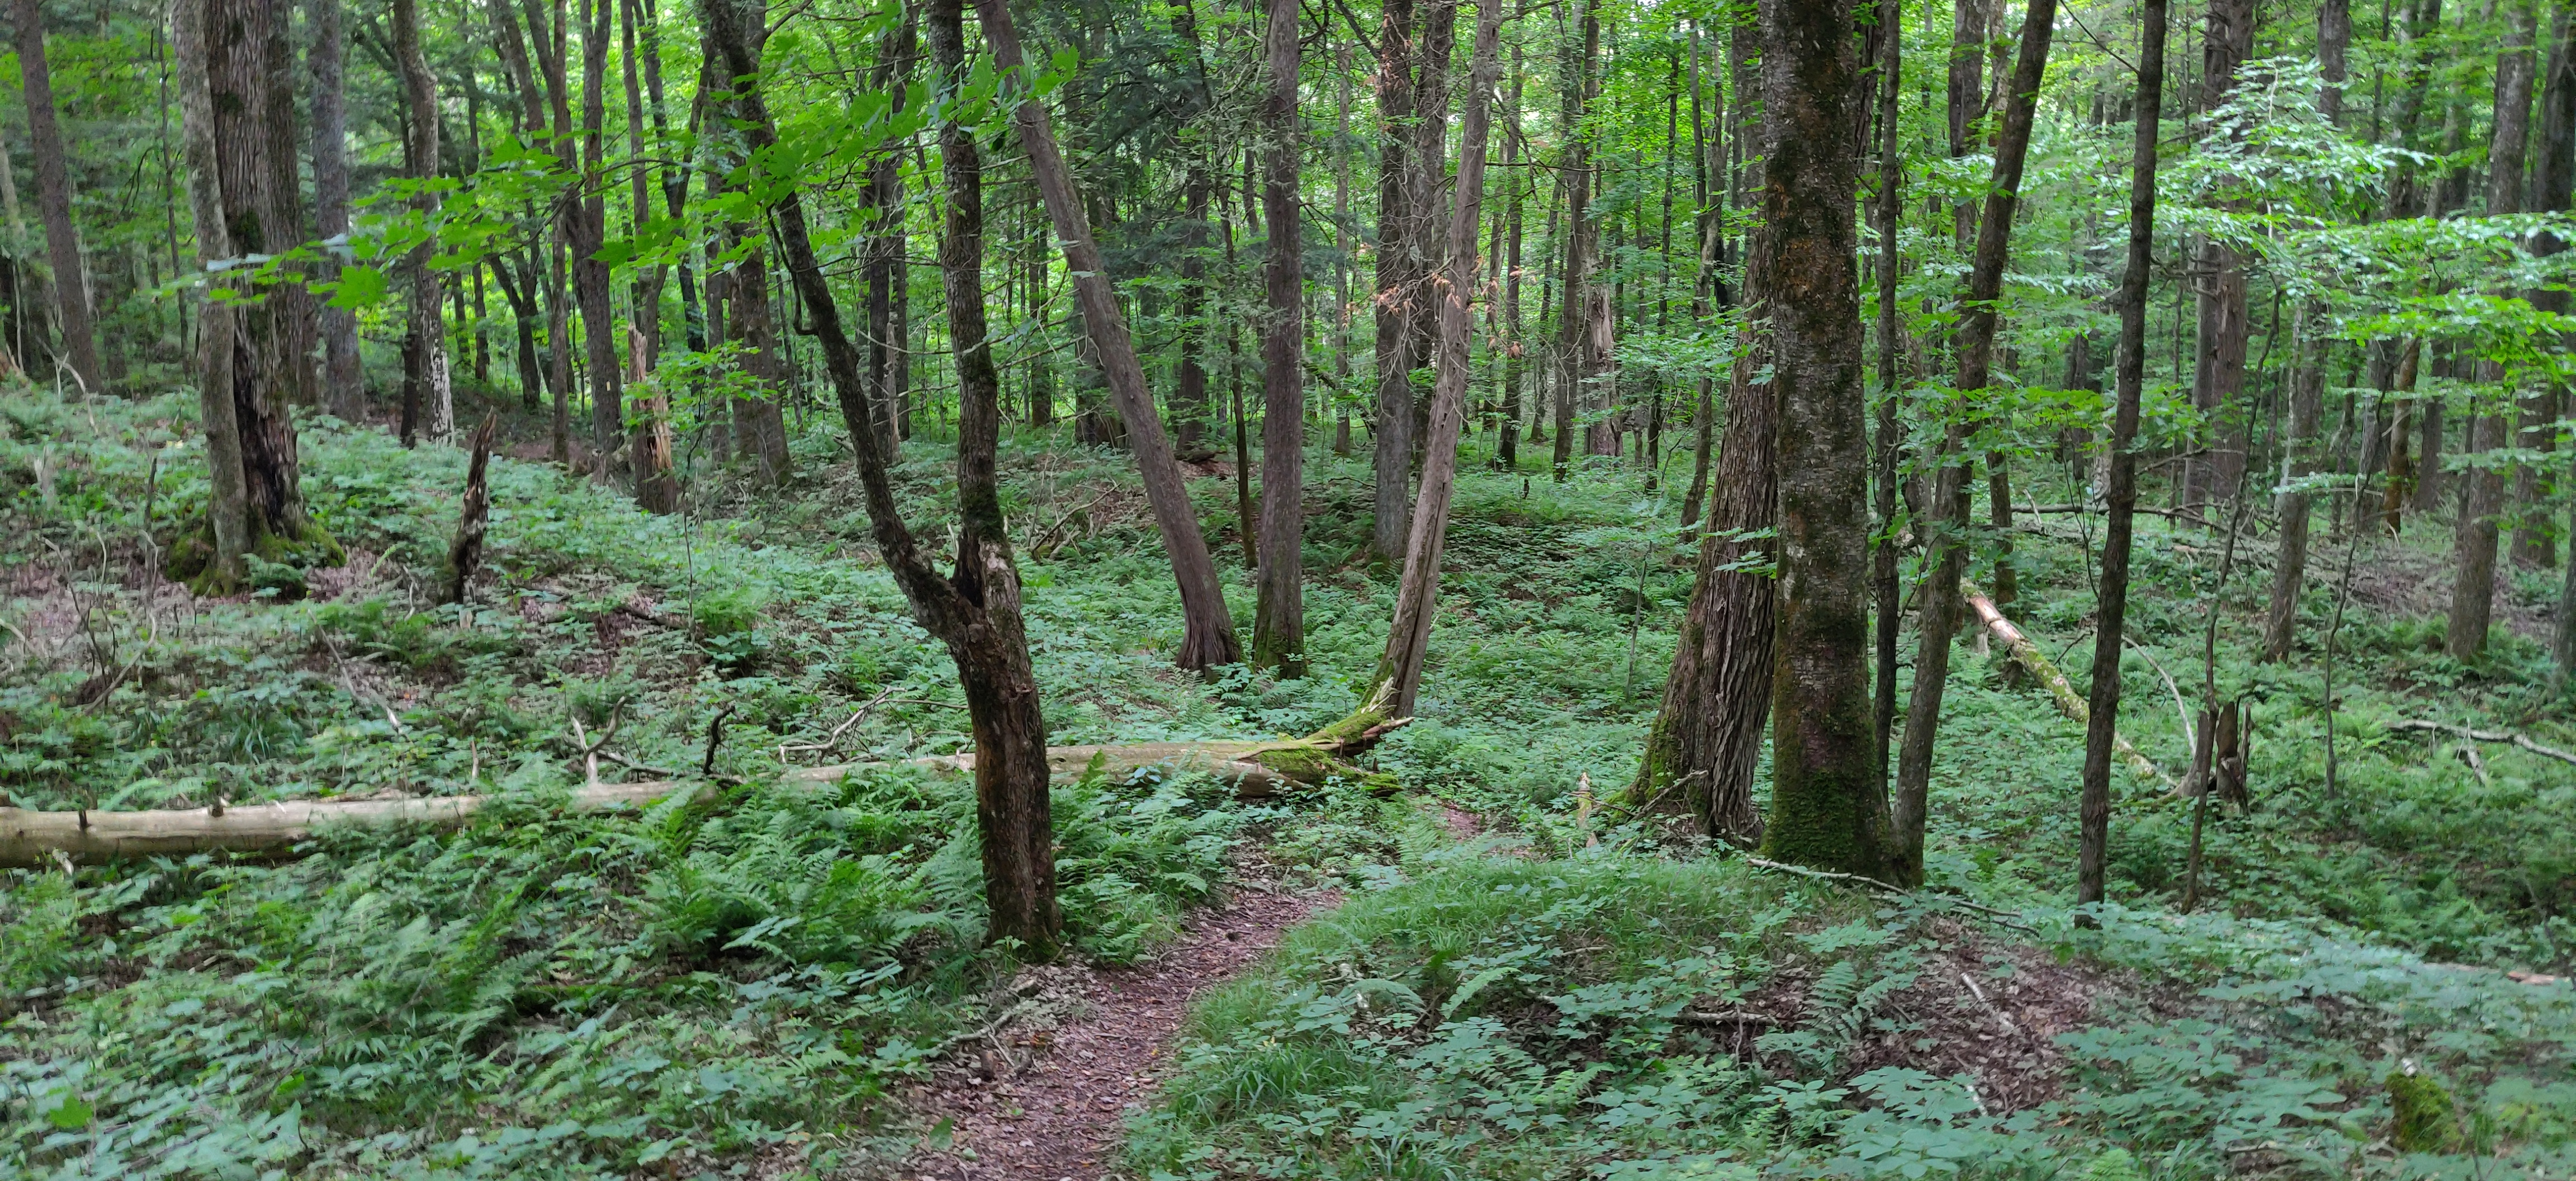 Photo of the Ice Age Trail in the Chequamegon-Nicolet National Forest, Wisconsin.